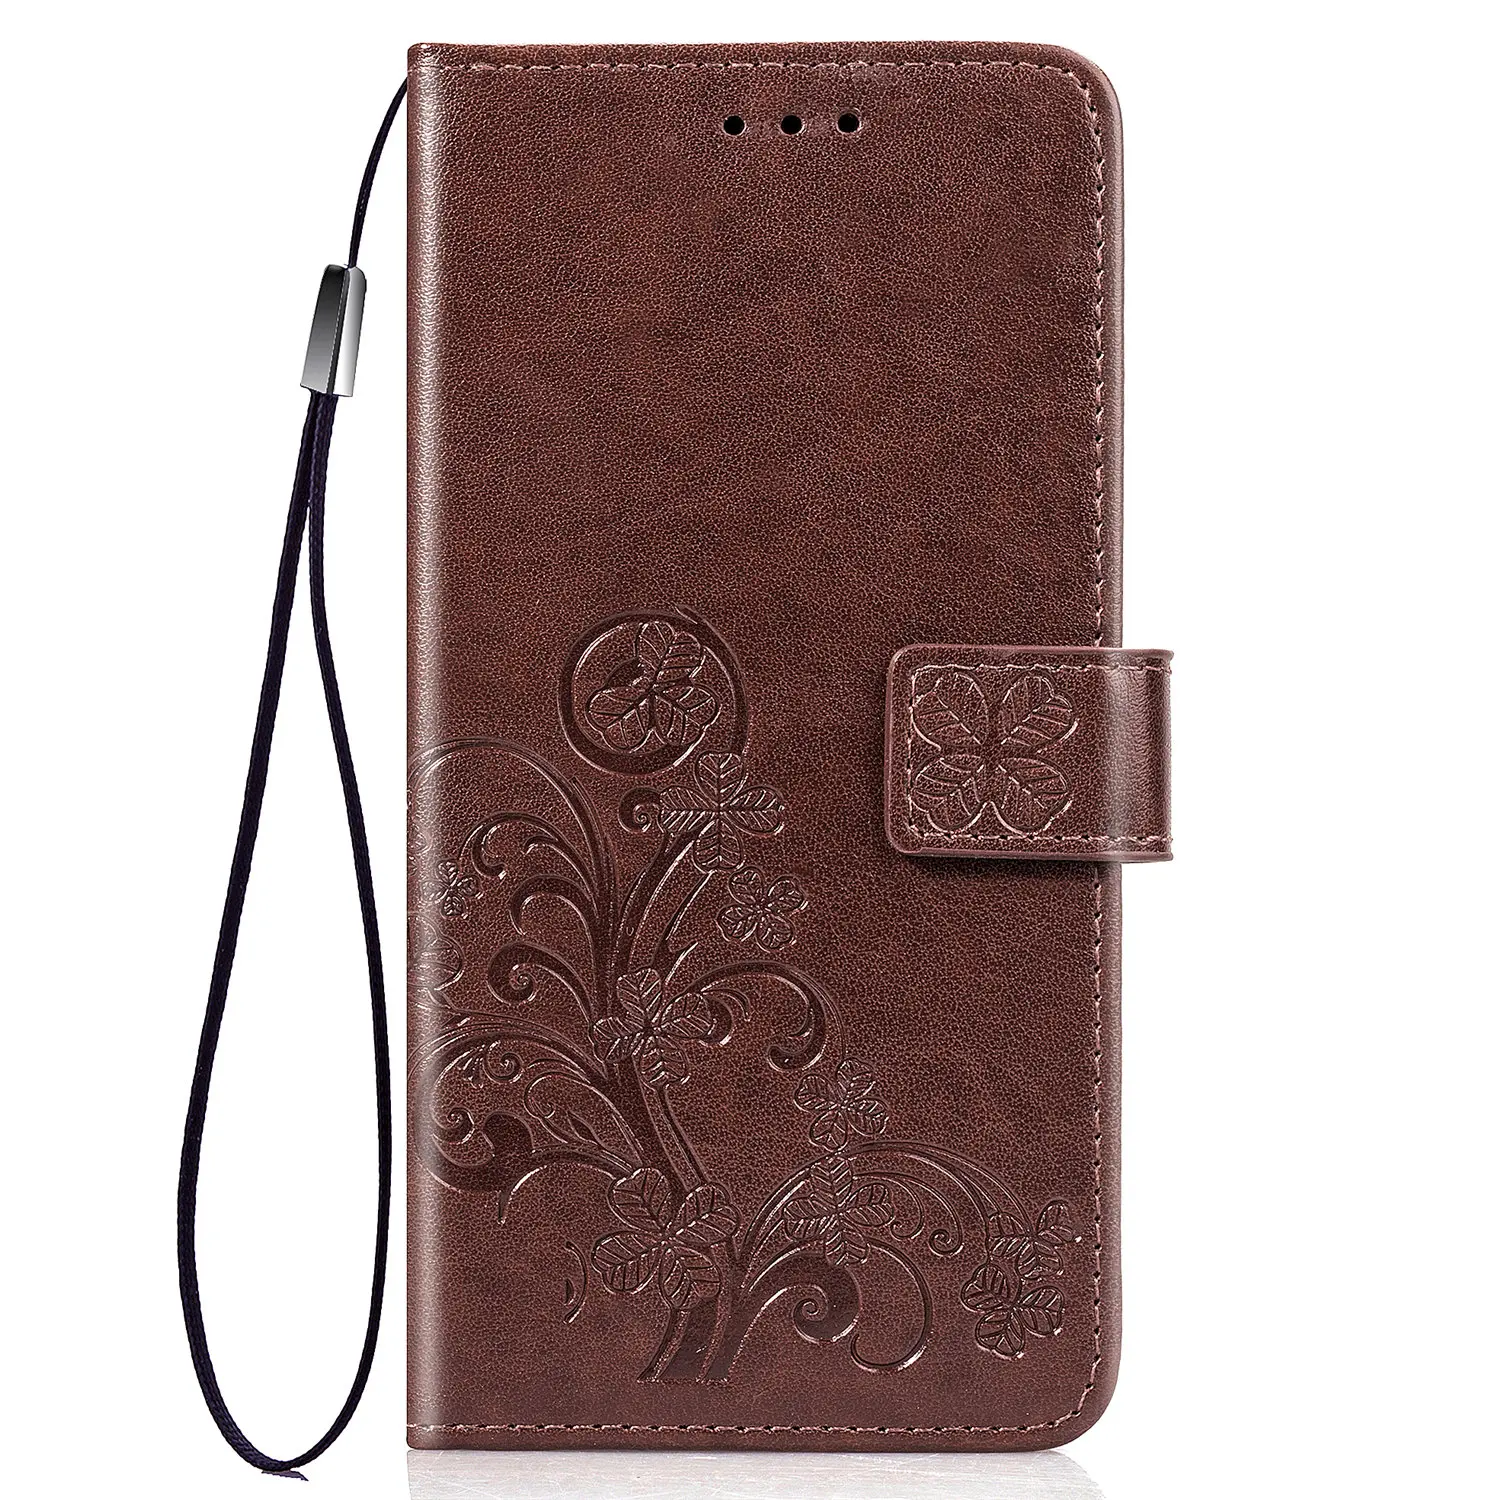 Phone Case For Asus Zenfone 4 Max ZC520KL Case wallet Leather Flip Cover Asus X00ID X00HD For Asus Zenfone 4 MAX ZC554KL Case